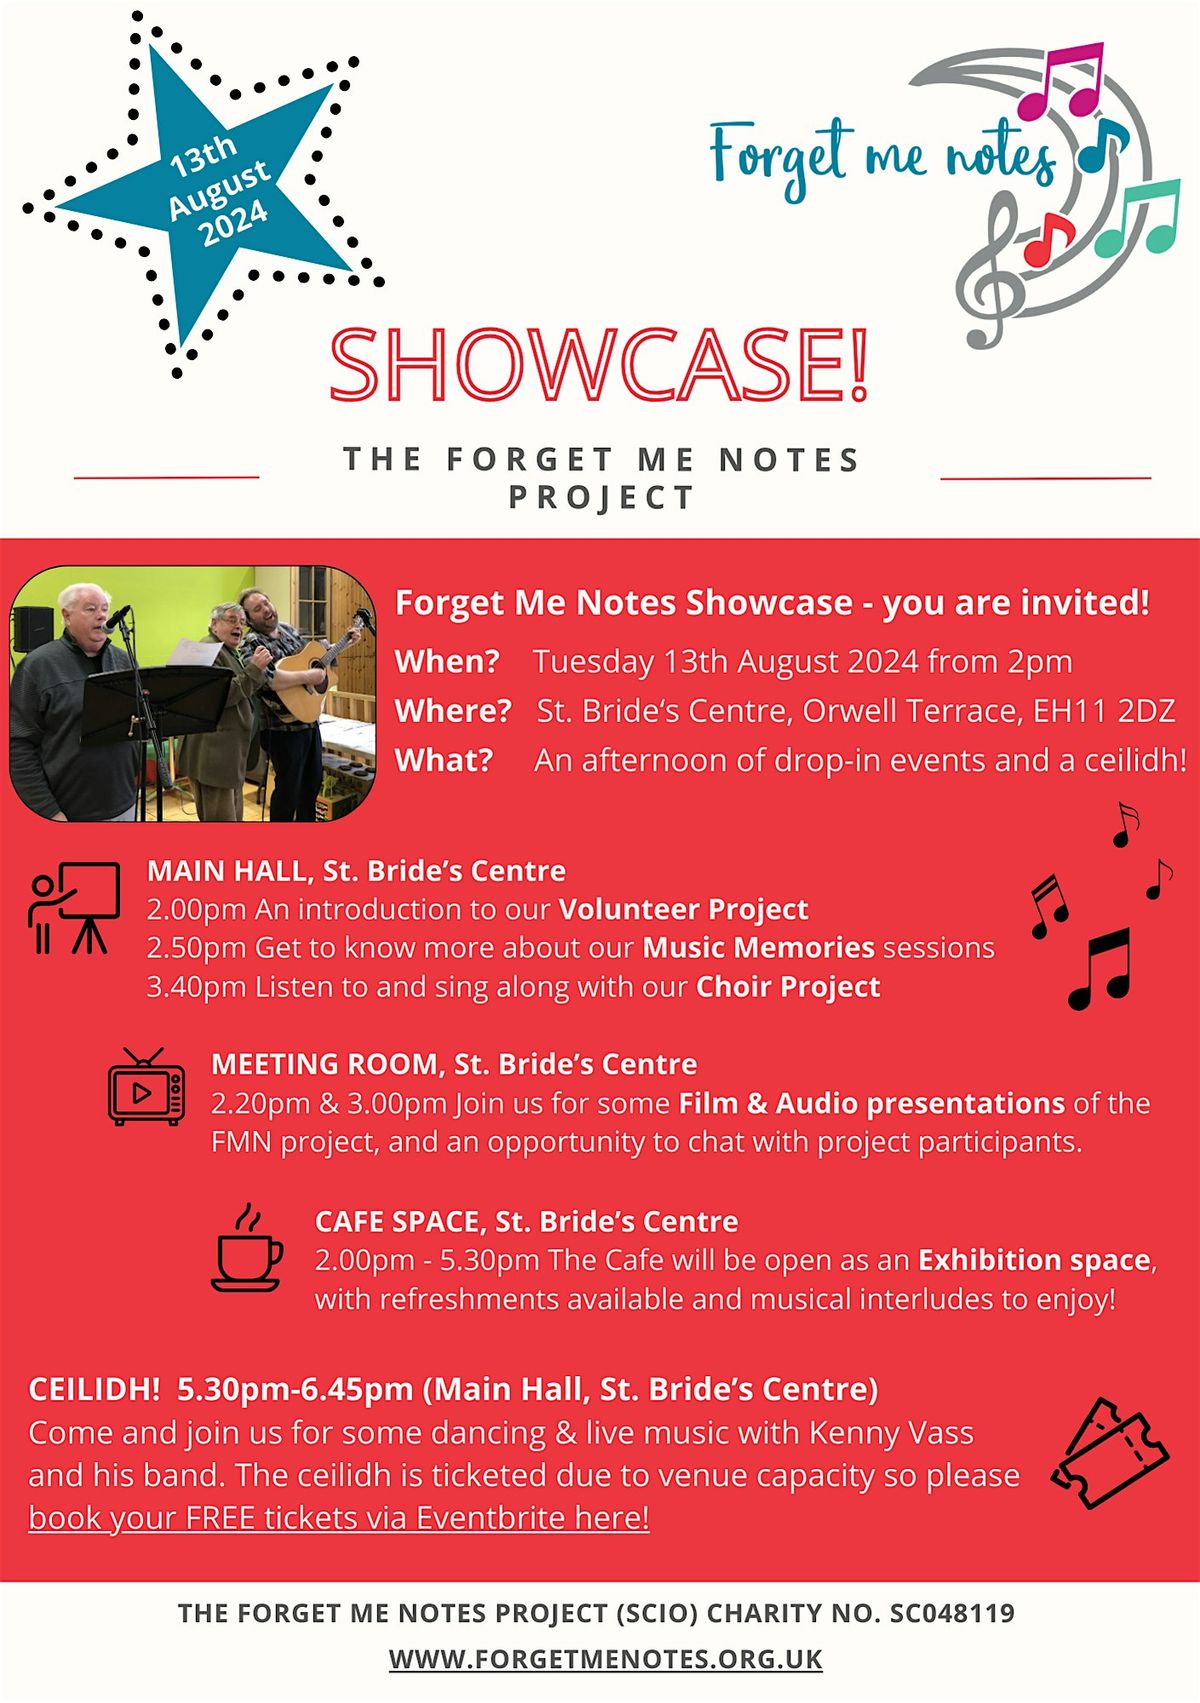 The Forget Me Notes Showcase Ceilidh!